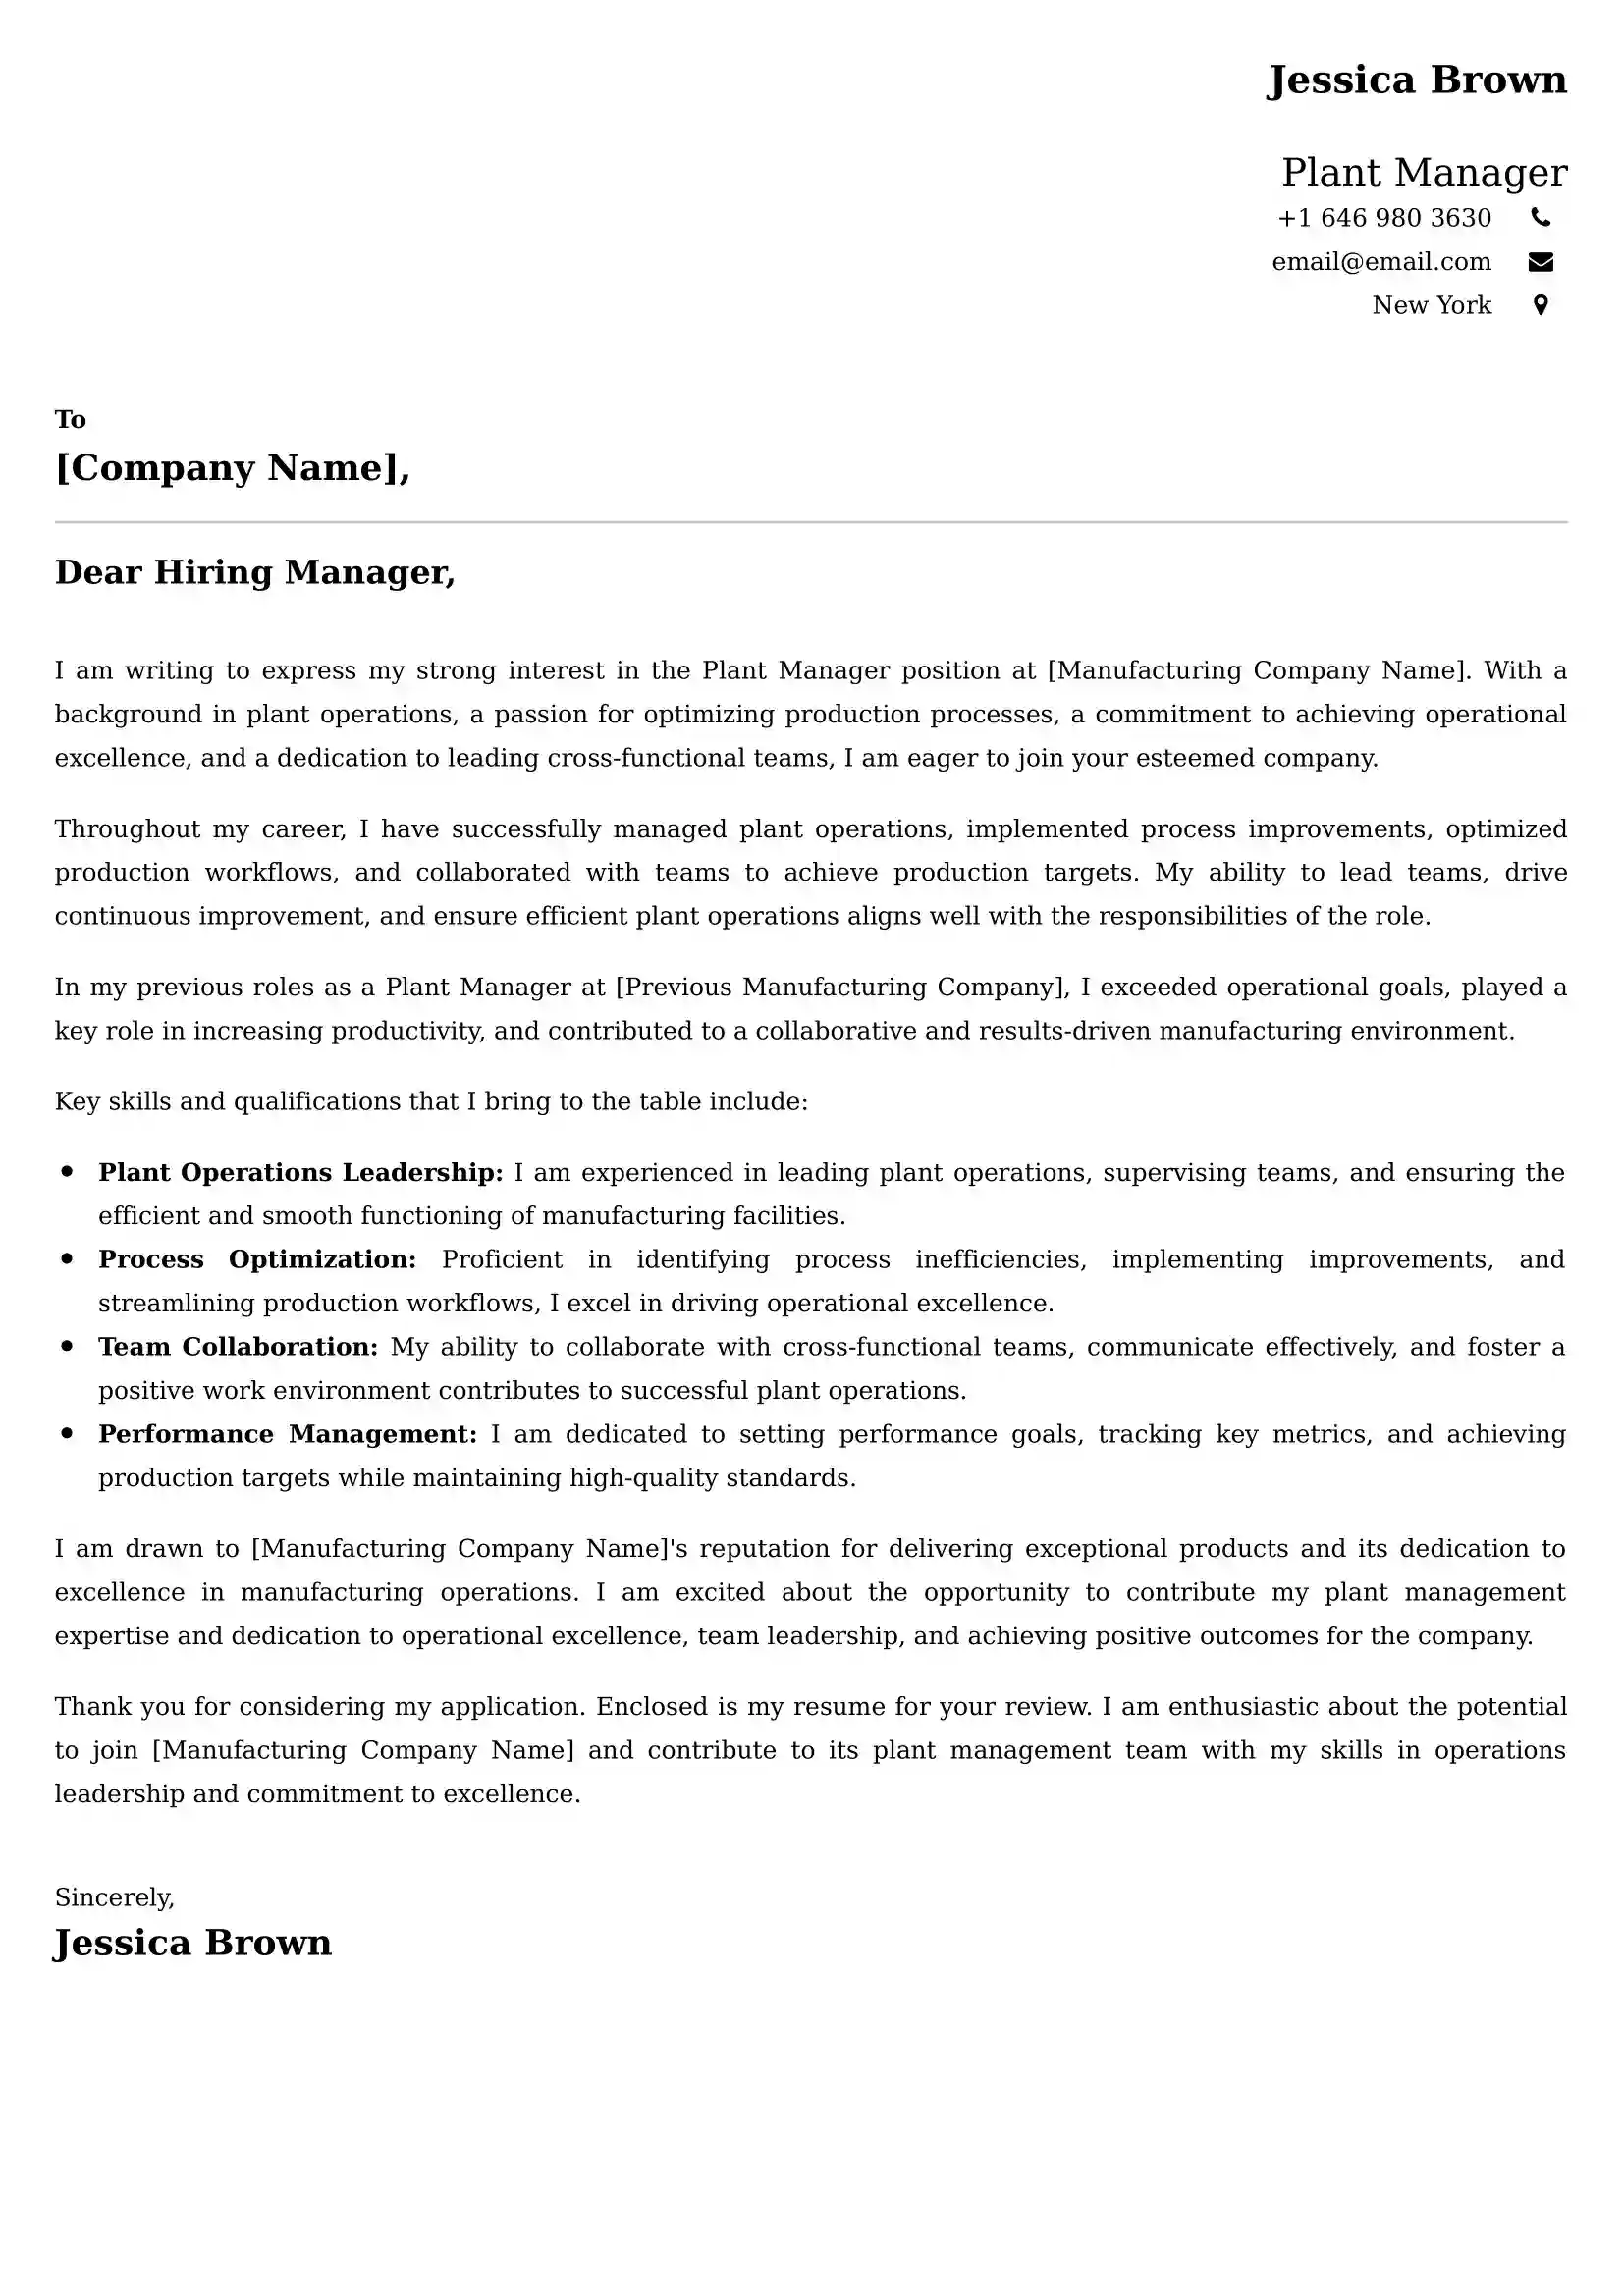 Plant Manager Cover Letter Examples -Latest Brazilian Templates